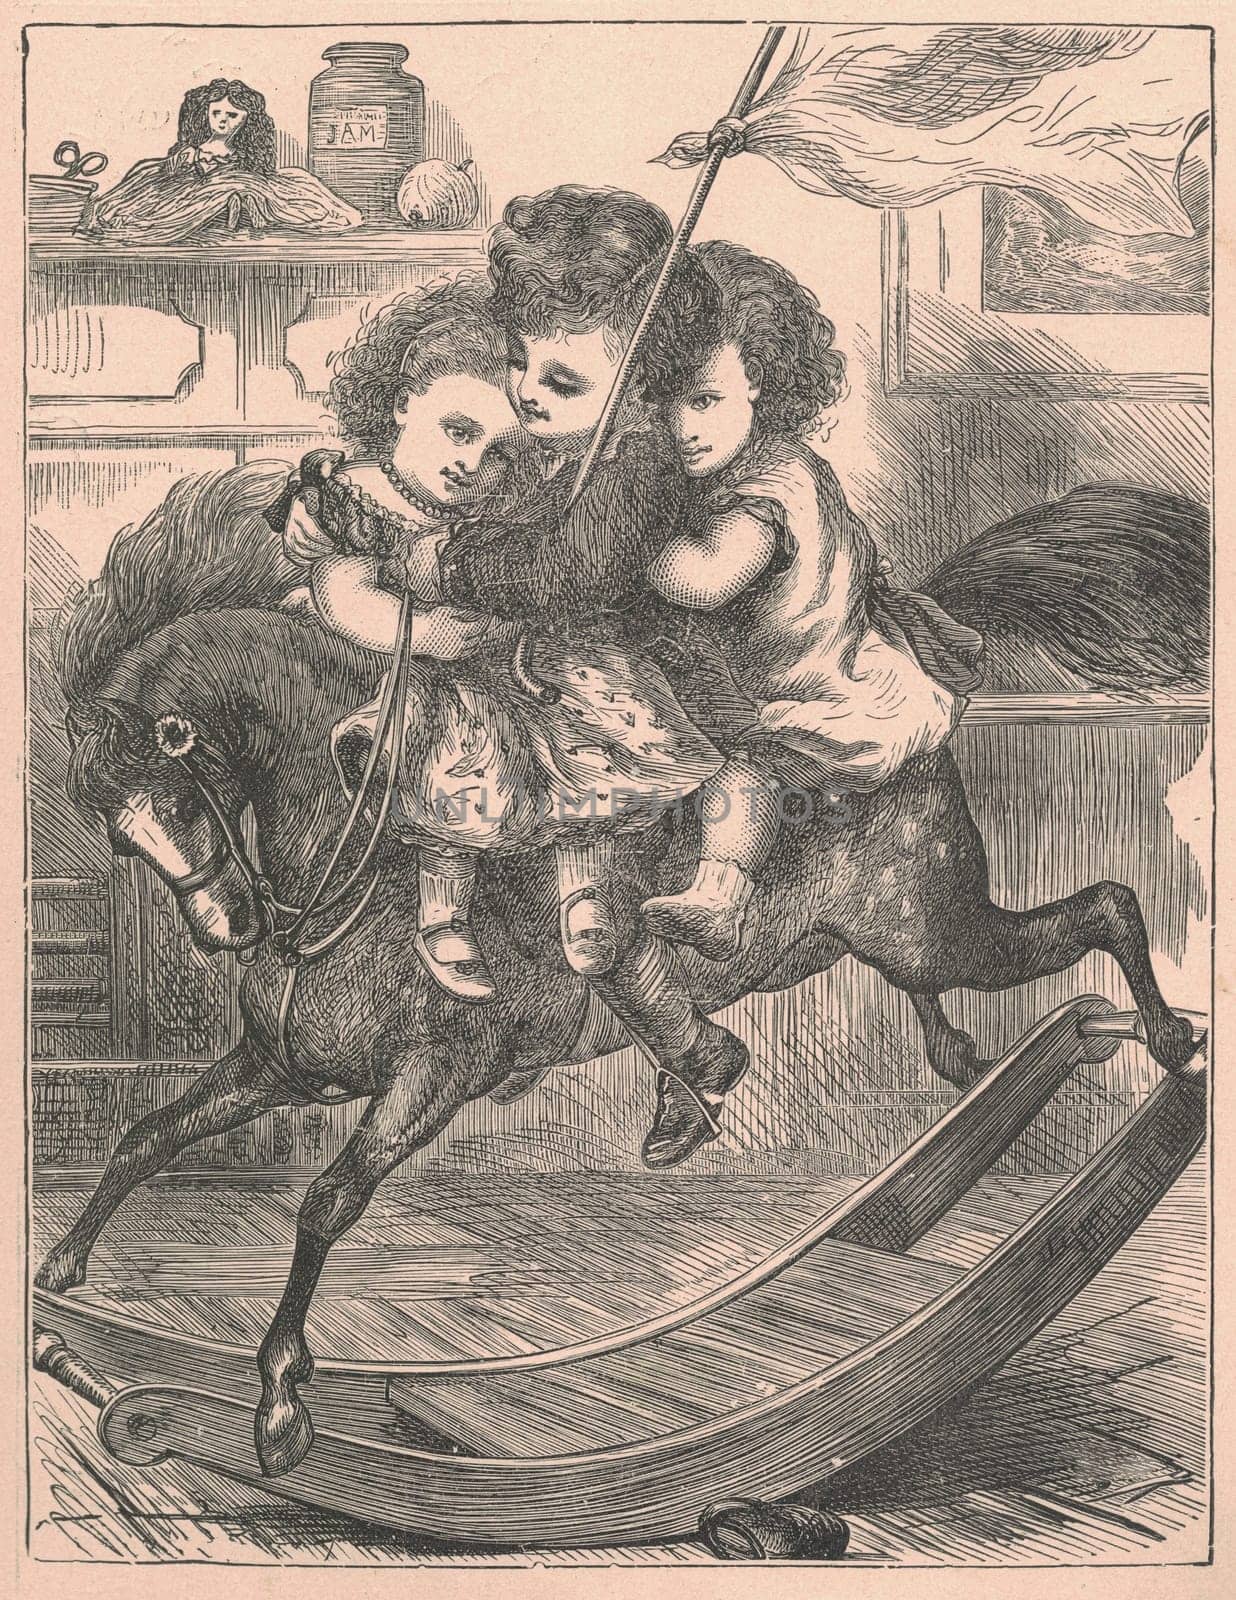 Black and white antique illustration shows children swing on a rocking horse. Vintage drawing shows the children swing on the rocking horse. Old picture from fairy tale book. Storybook illustration published 1910. by roman_nerud